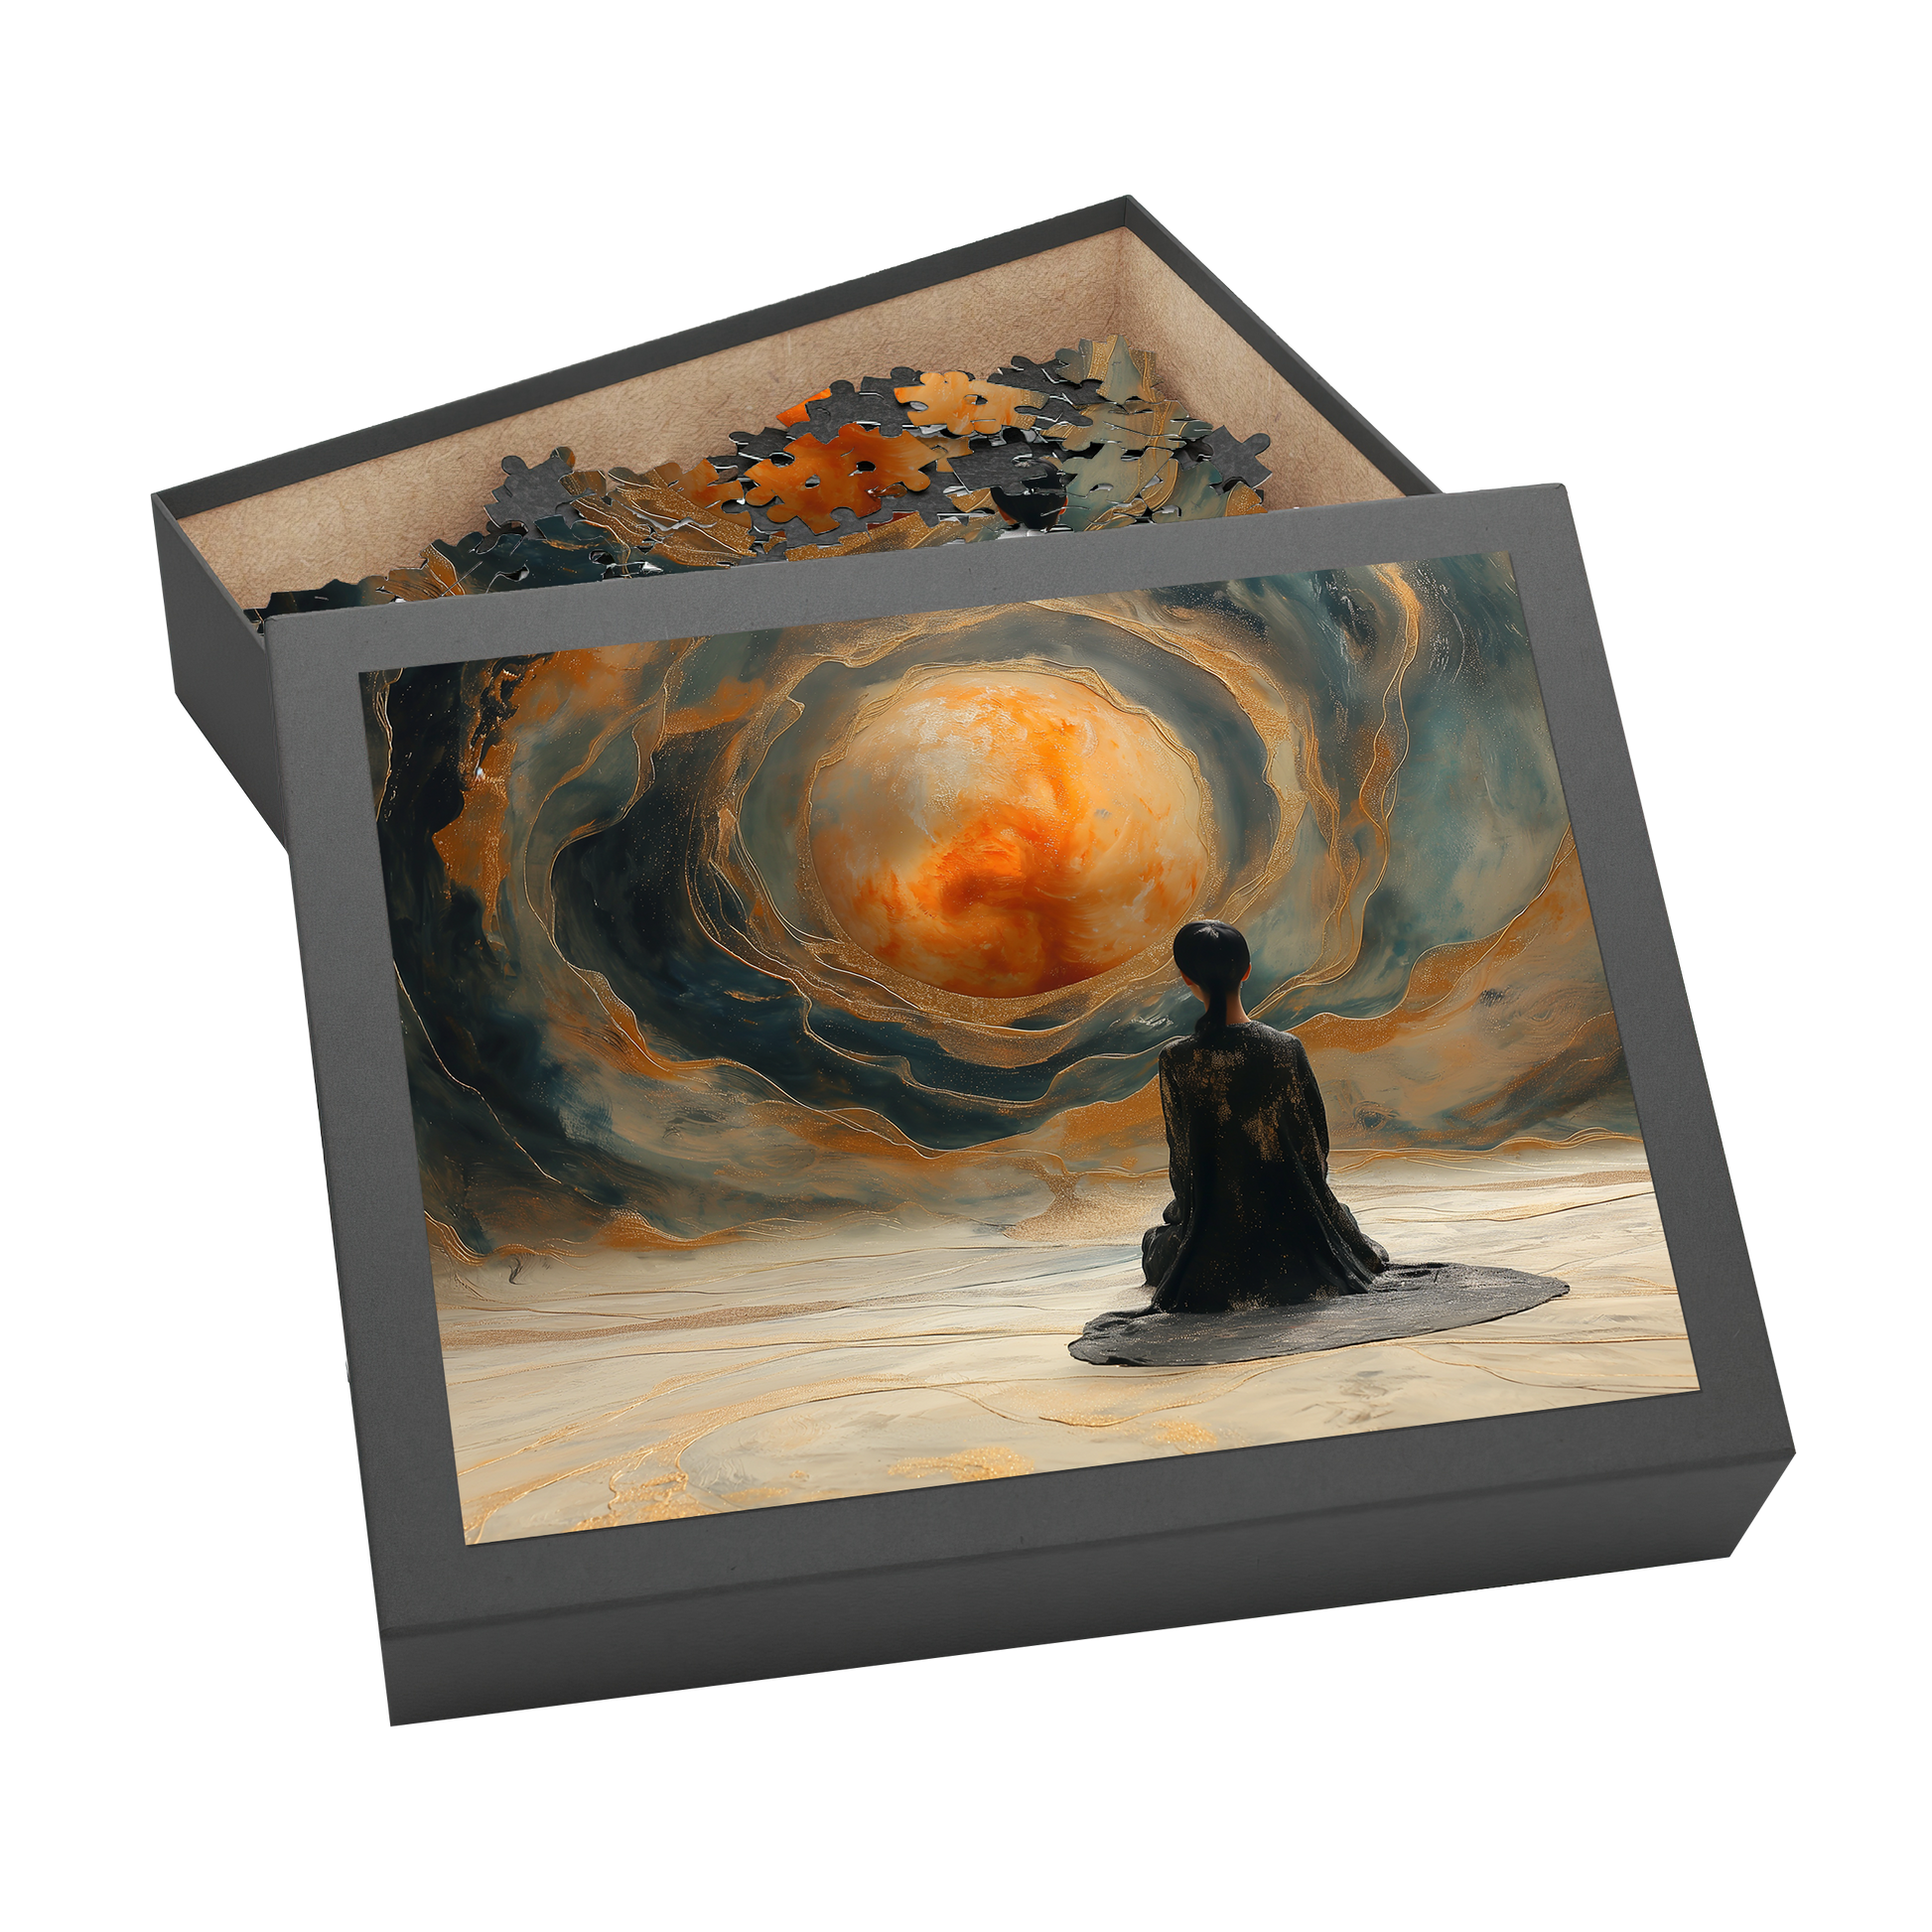 Awaiting The Portal - Premium Jigsaw Puzzle, Ornate, Detailed - Multiple Sizes Available